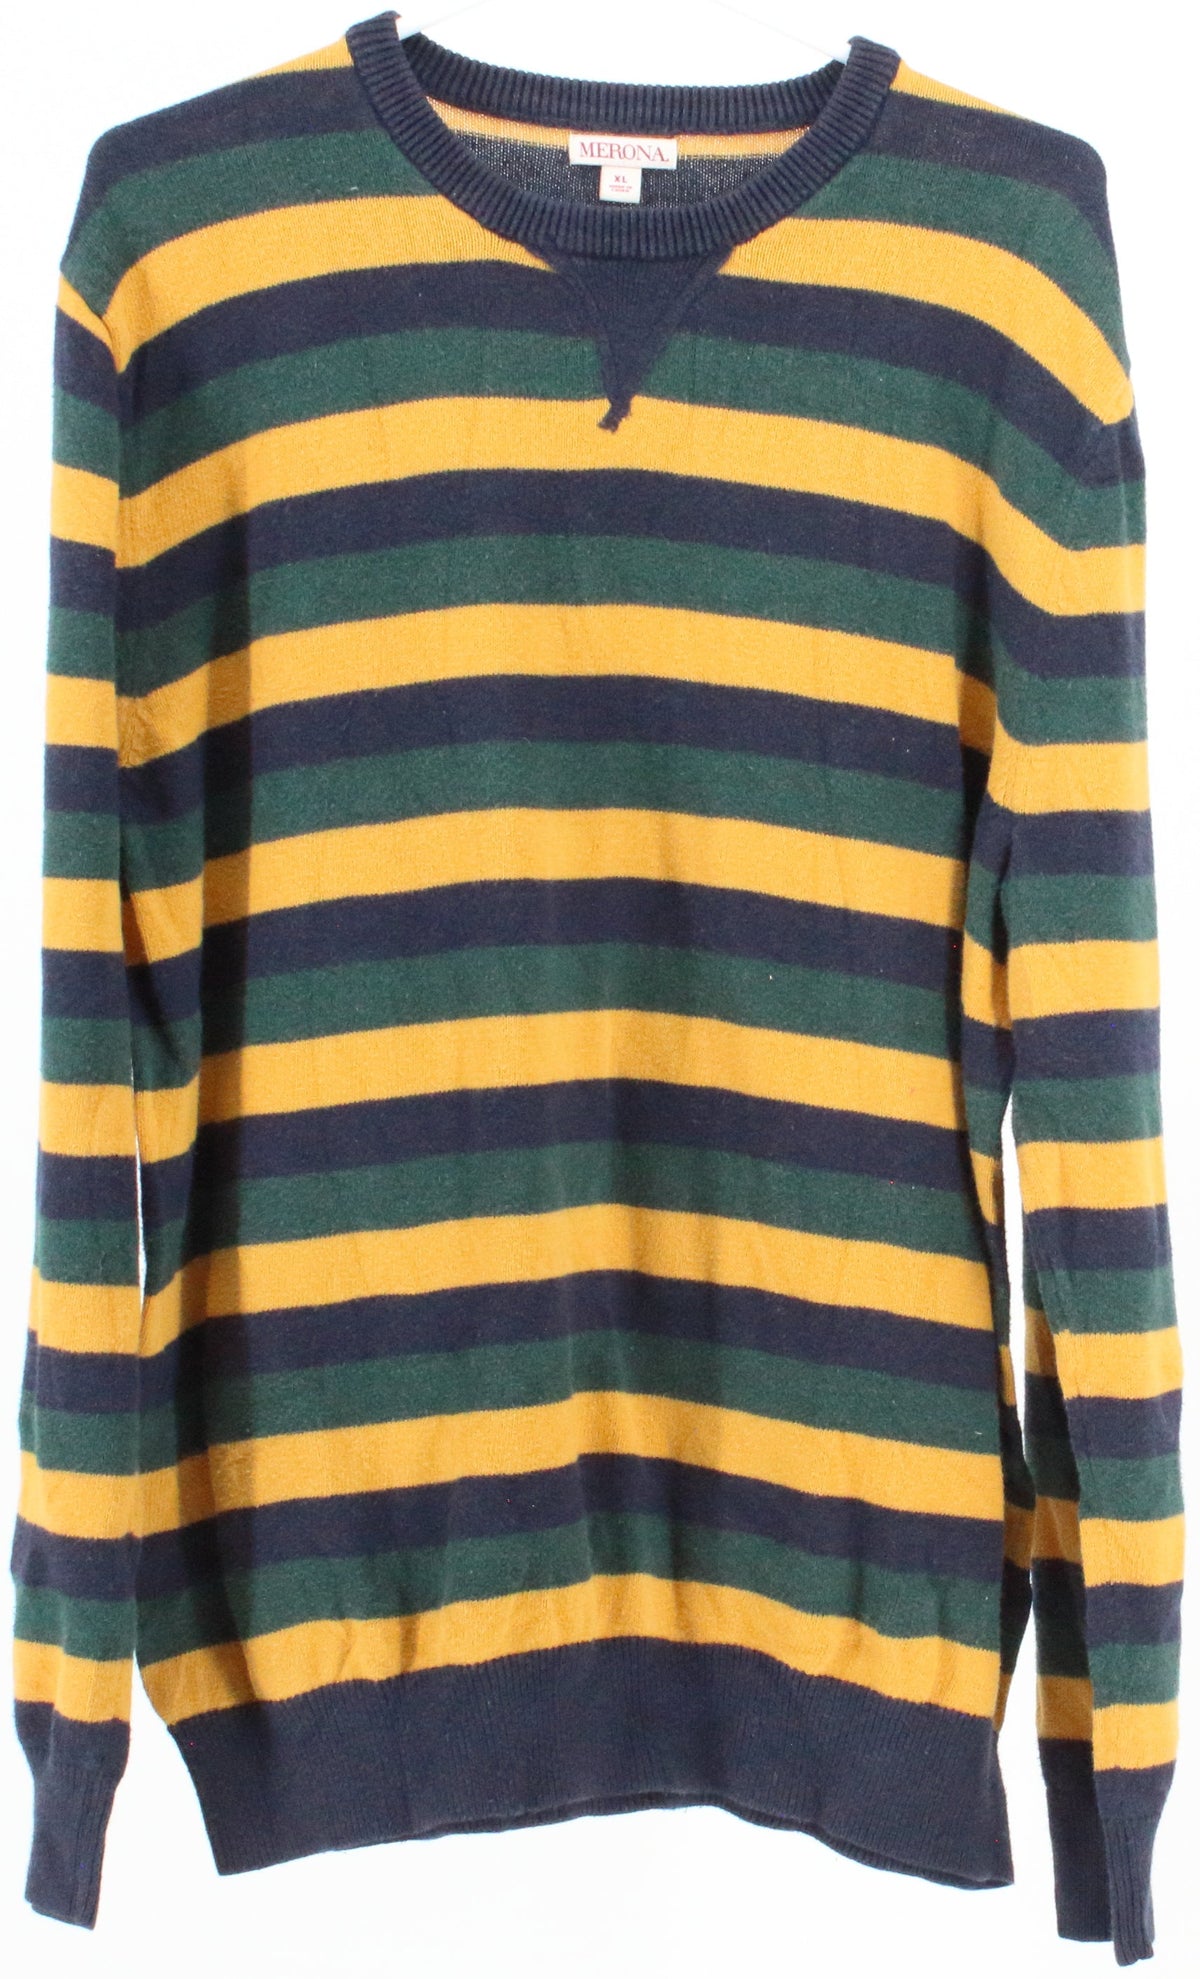 Merona Navy Blue Green and Yellow Striped Sweater